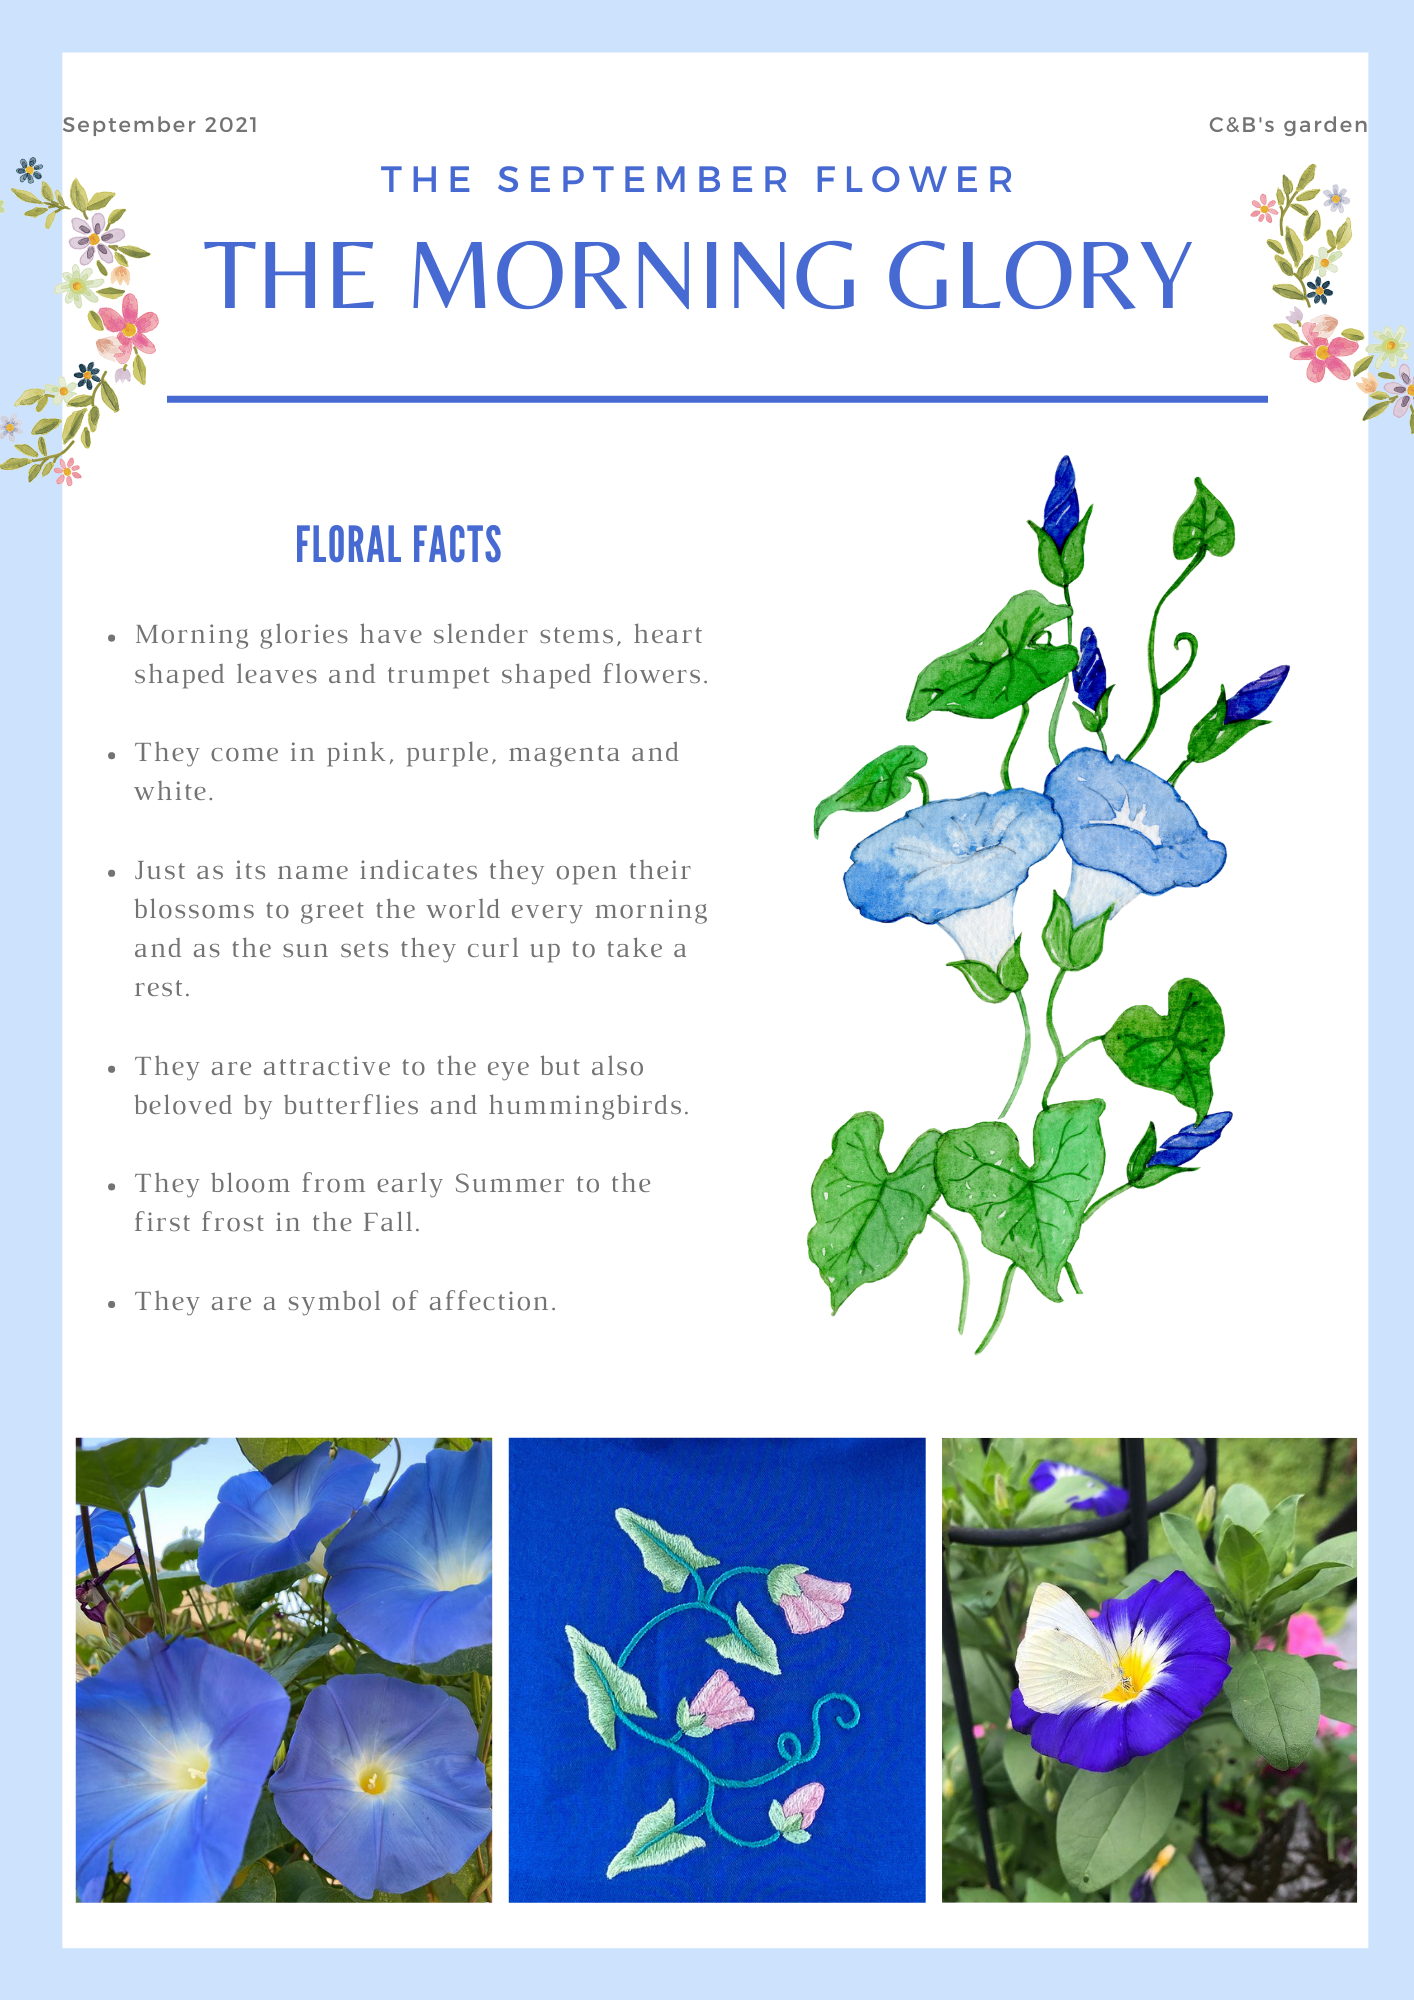 Fun facts about flowers for children - Learn all about the morning glory - Charlotte and Burlington family club